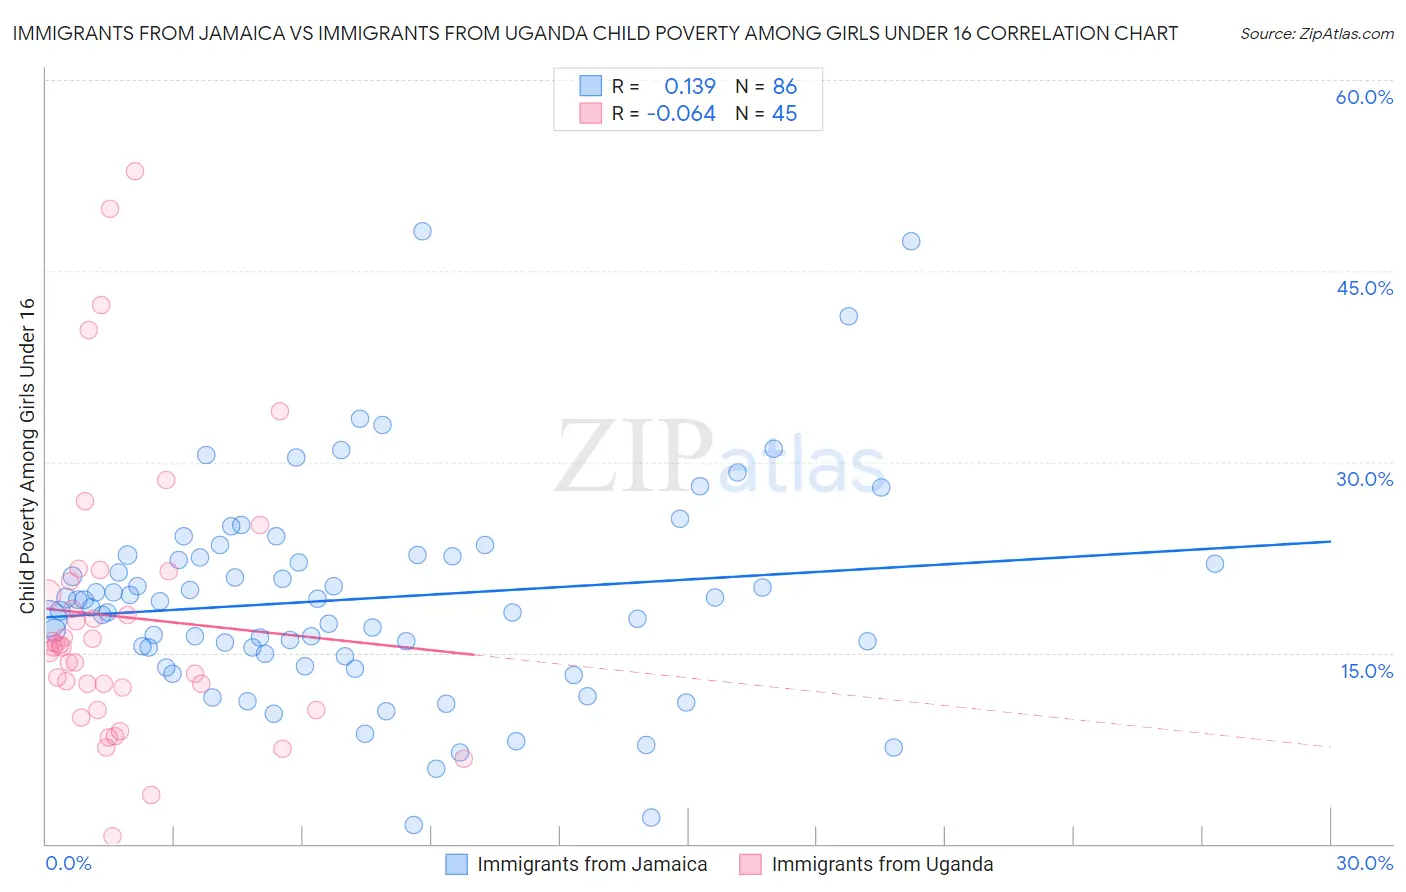 Immigrants from Jamaica vs Immigrants from Uganda Child Poverty Among Girls Under 16